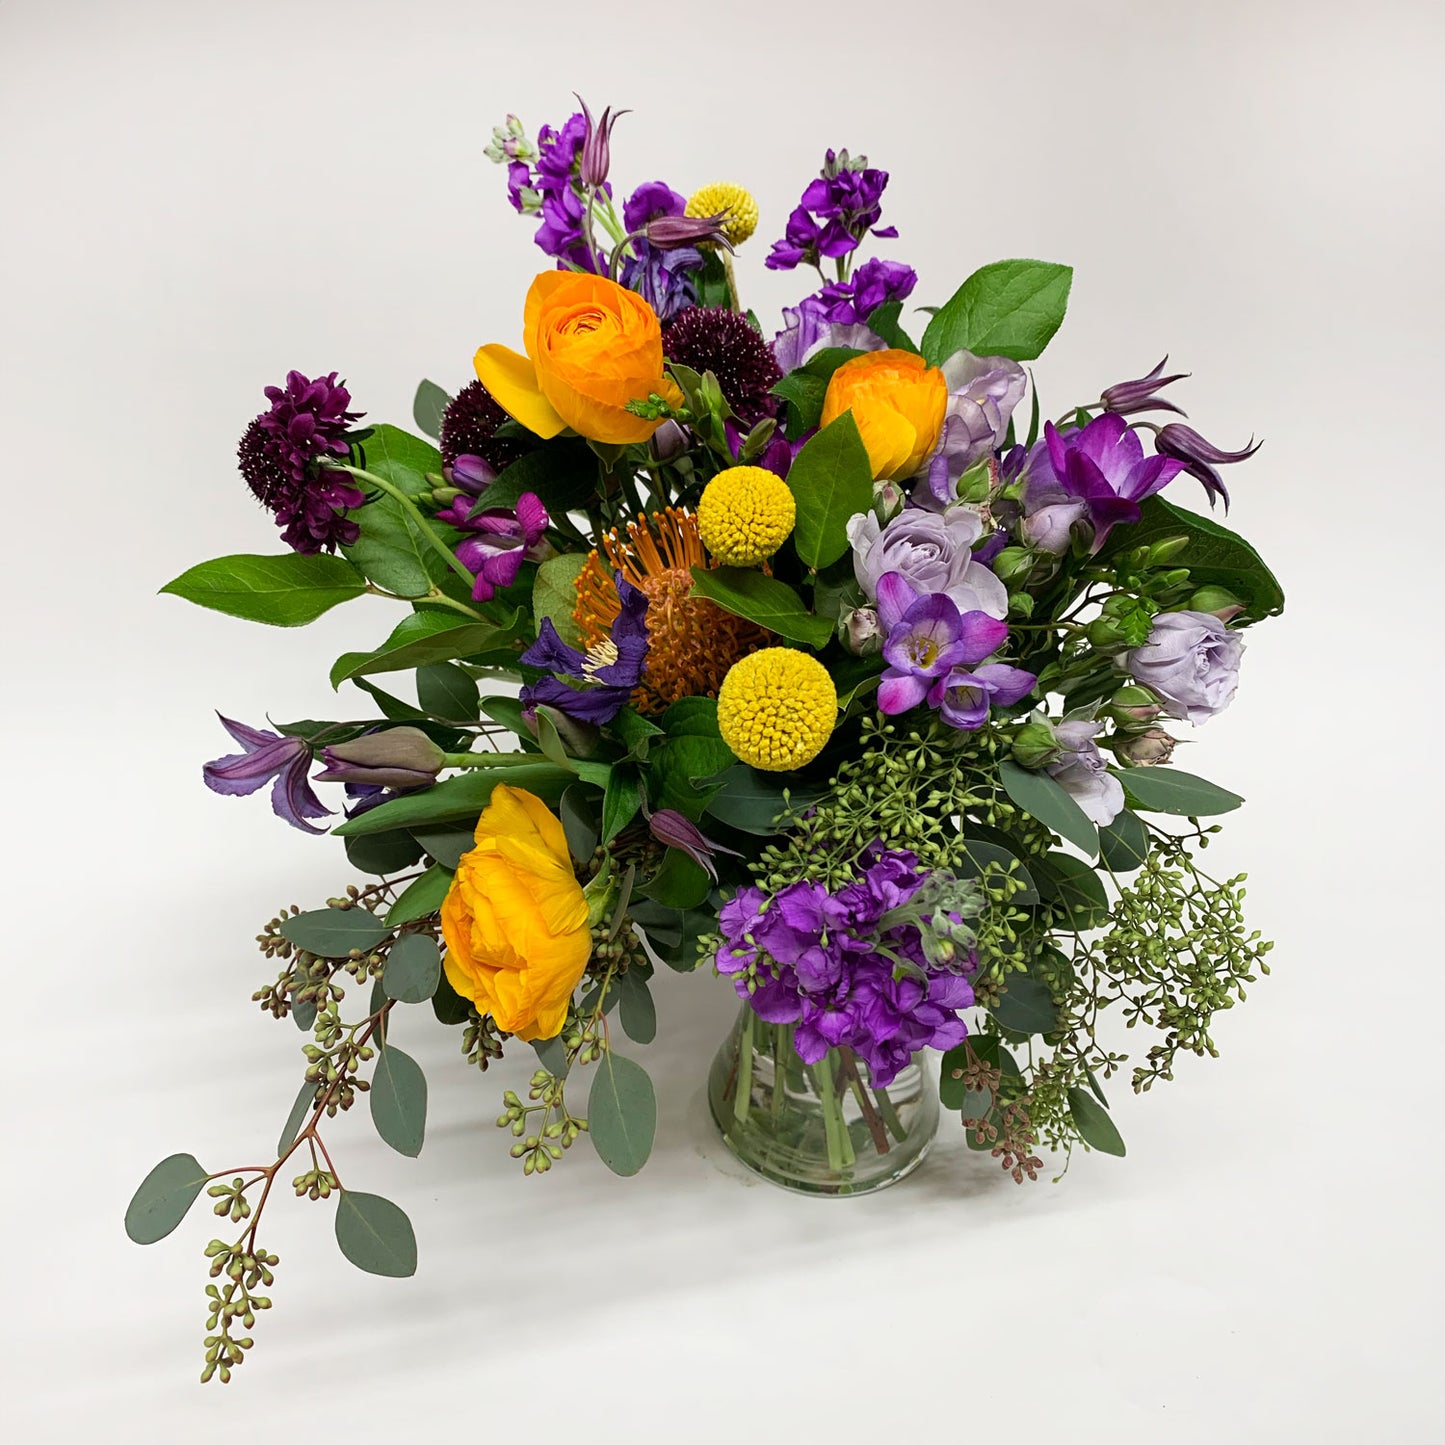 Image of a dynamic bouquet starting with yellows, deepening to purple and mauve, with a touch of acid orange for energy. Order online for same-day flower delivery from Toronto's best florist, available near you.